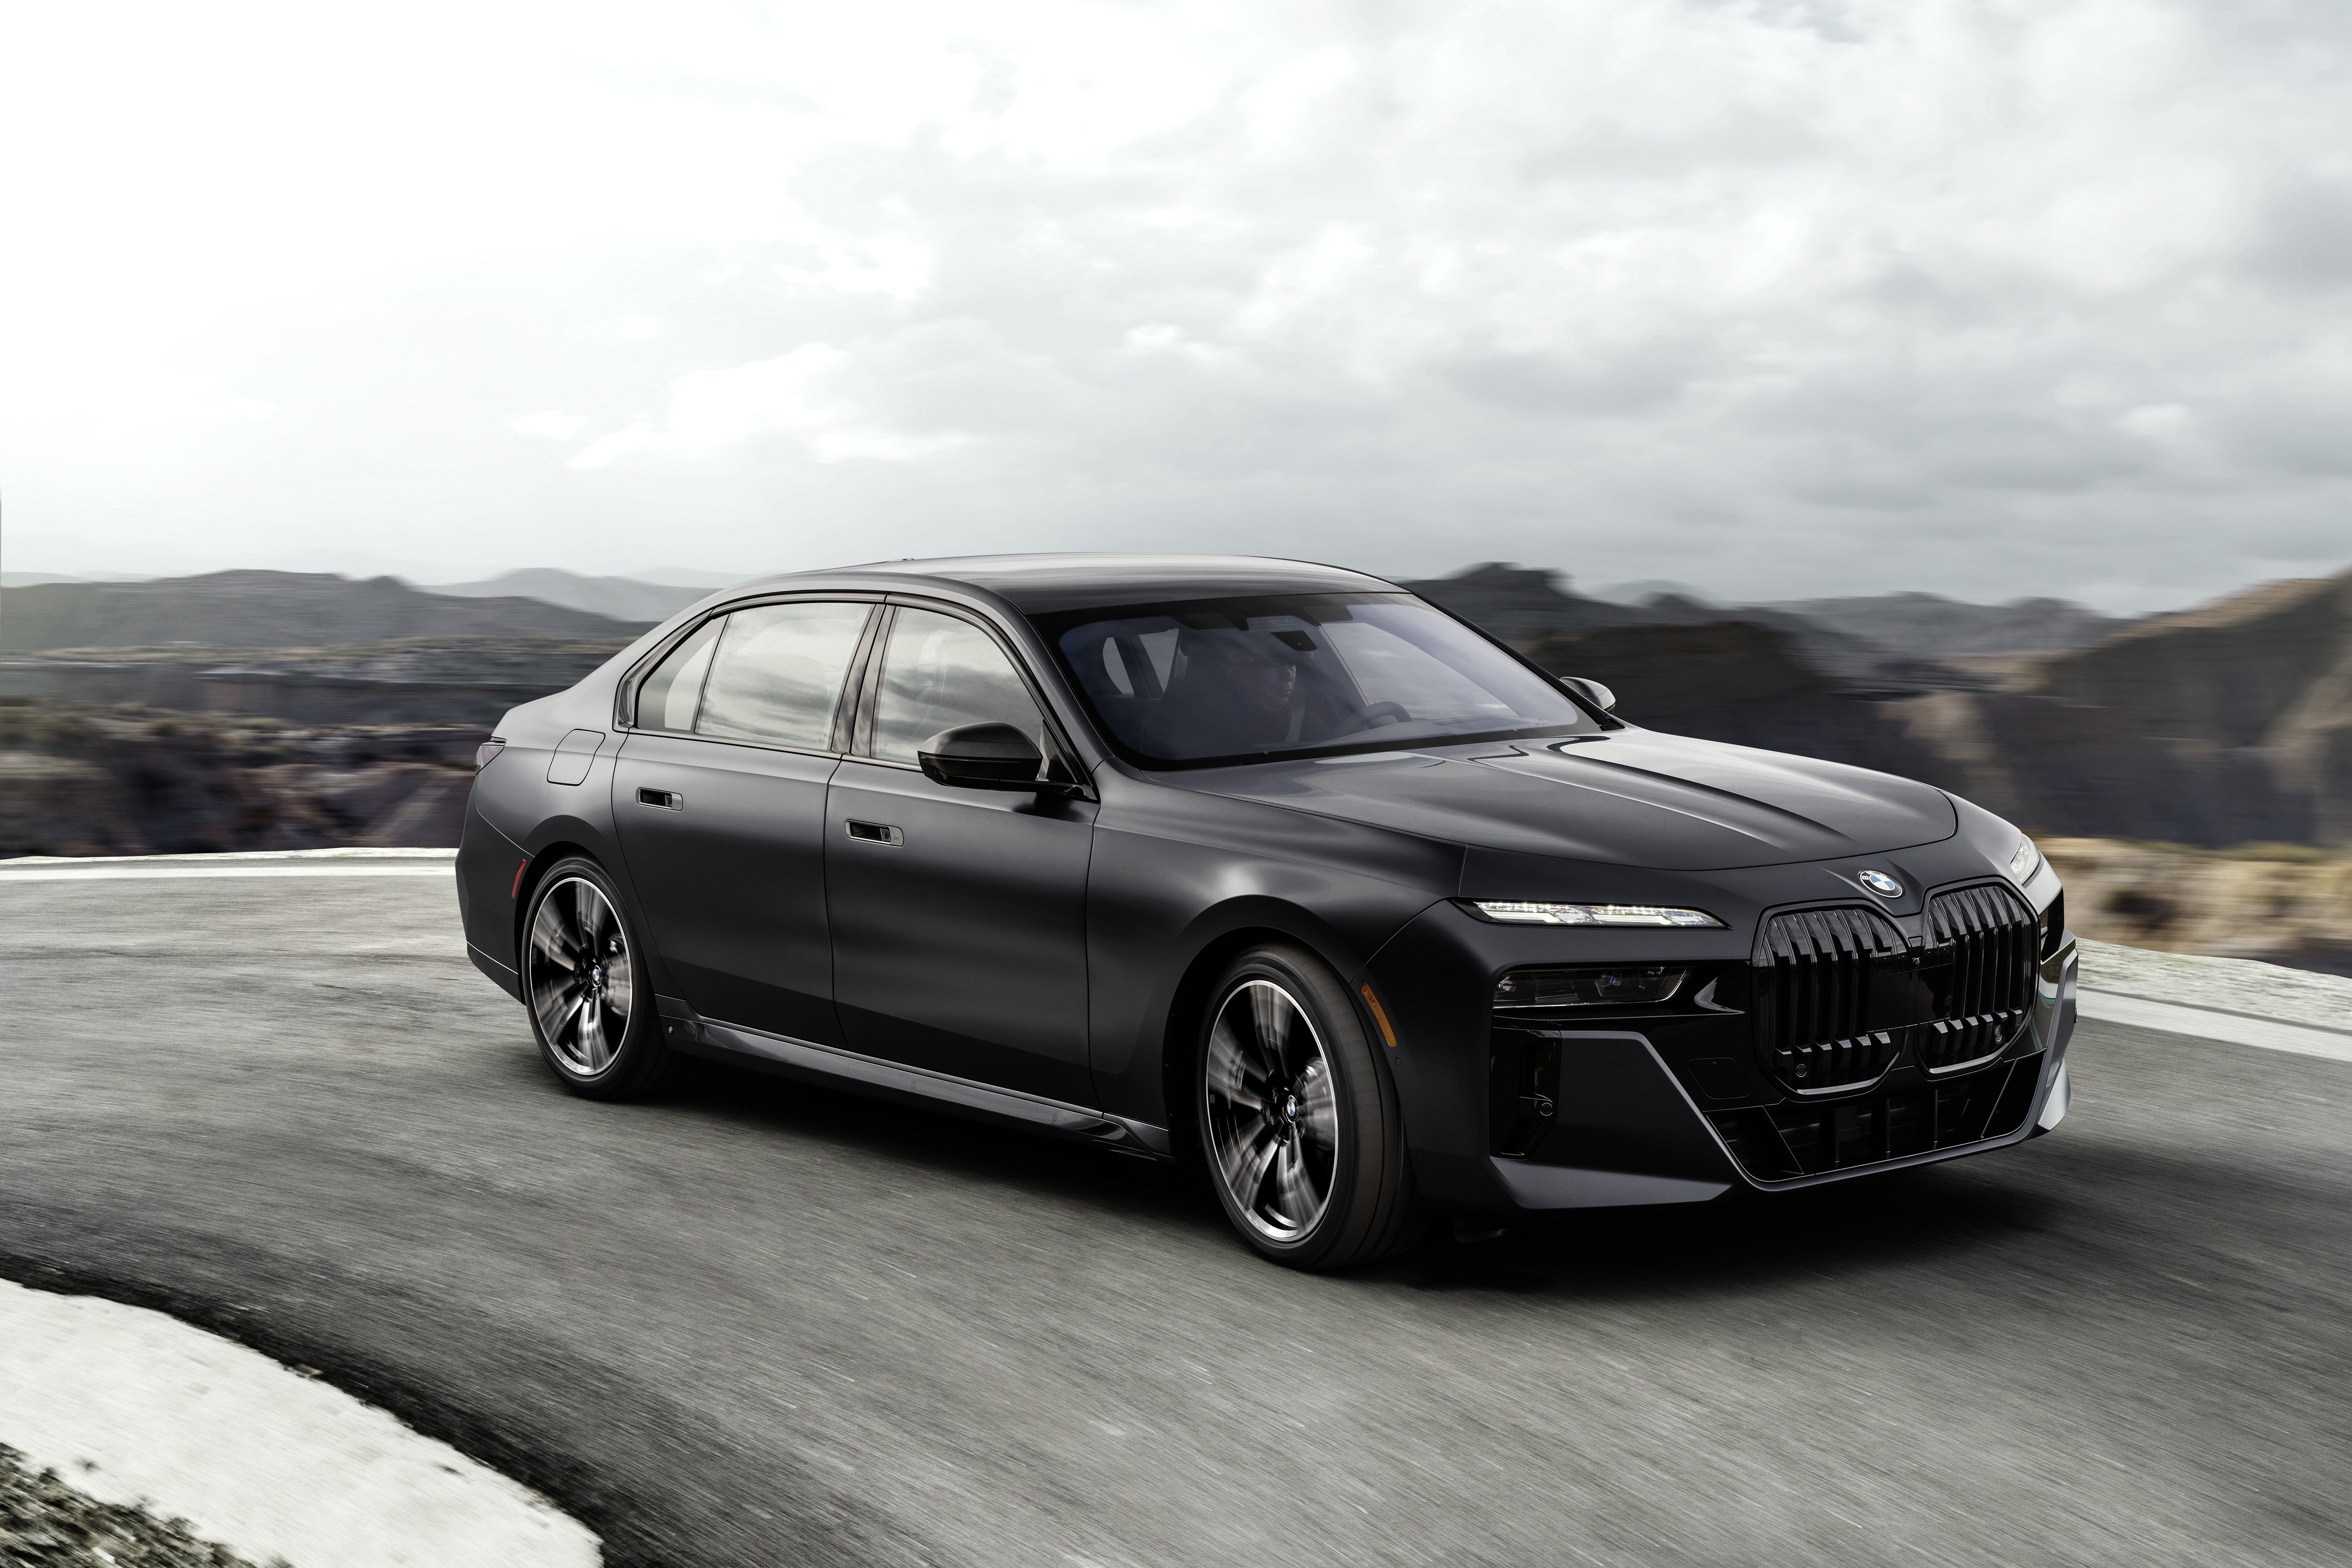 The New BMW 7 Series Arrives